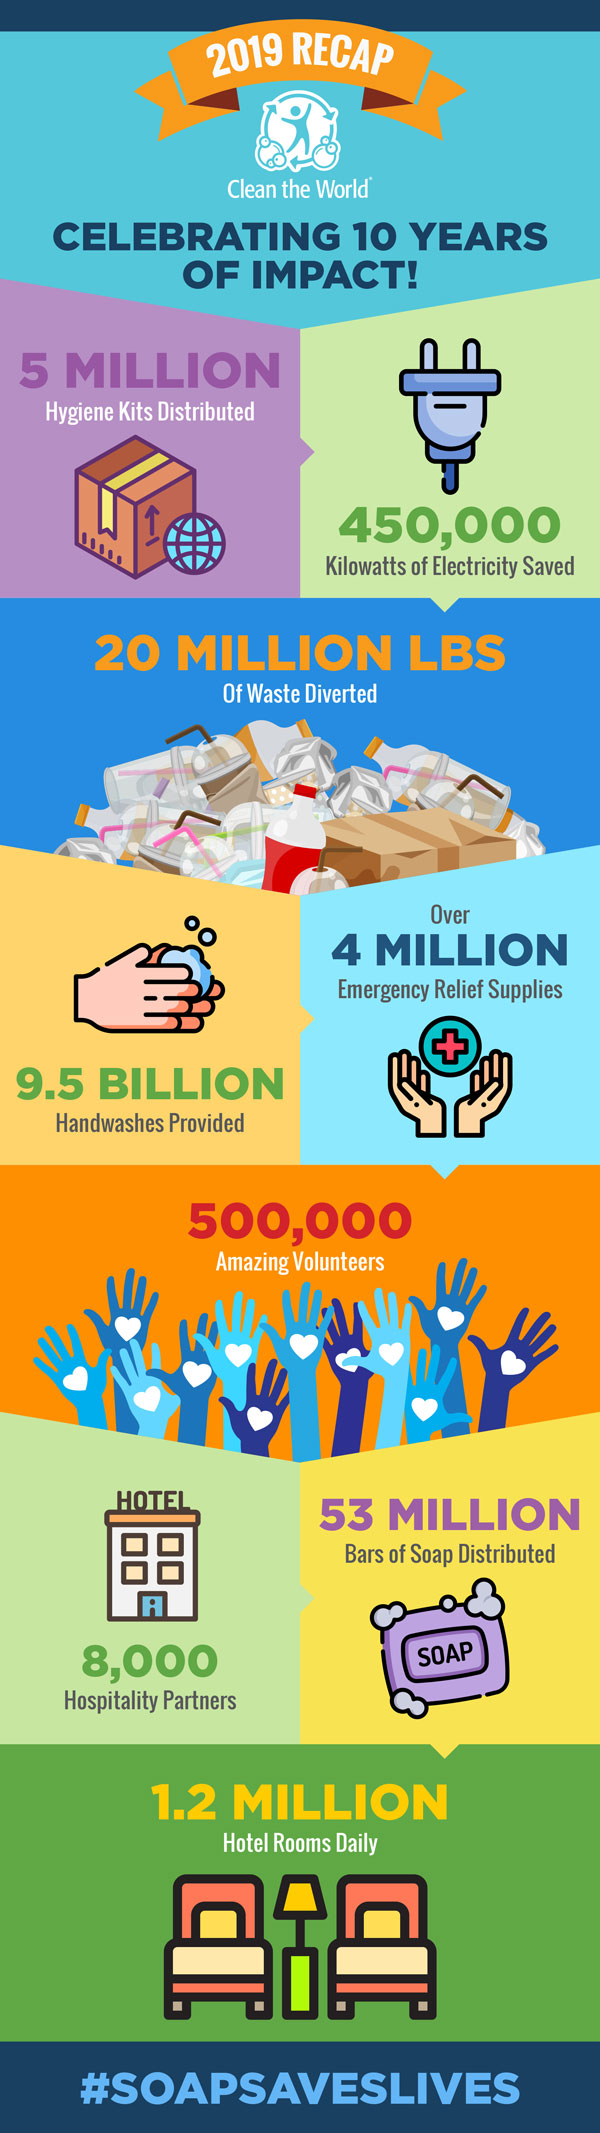 Clean the World Impact Infographic created by Ocasio Consulting